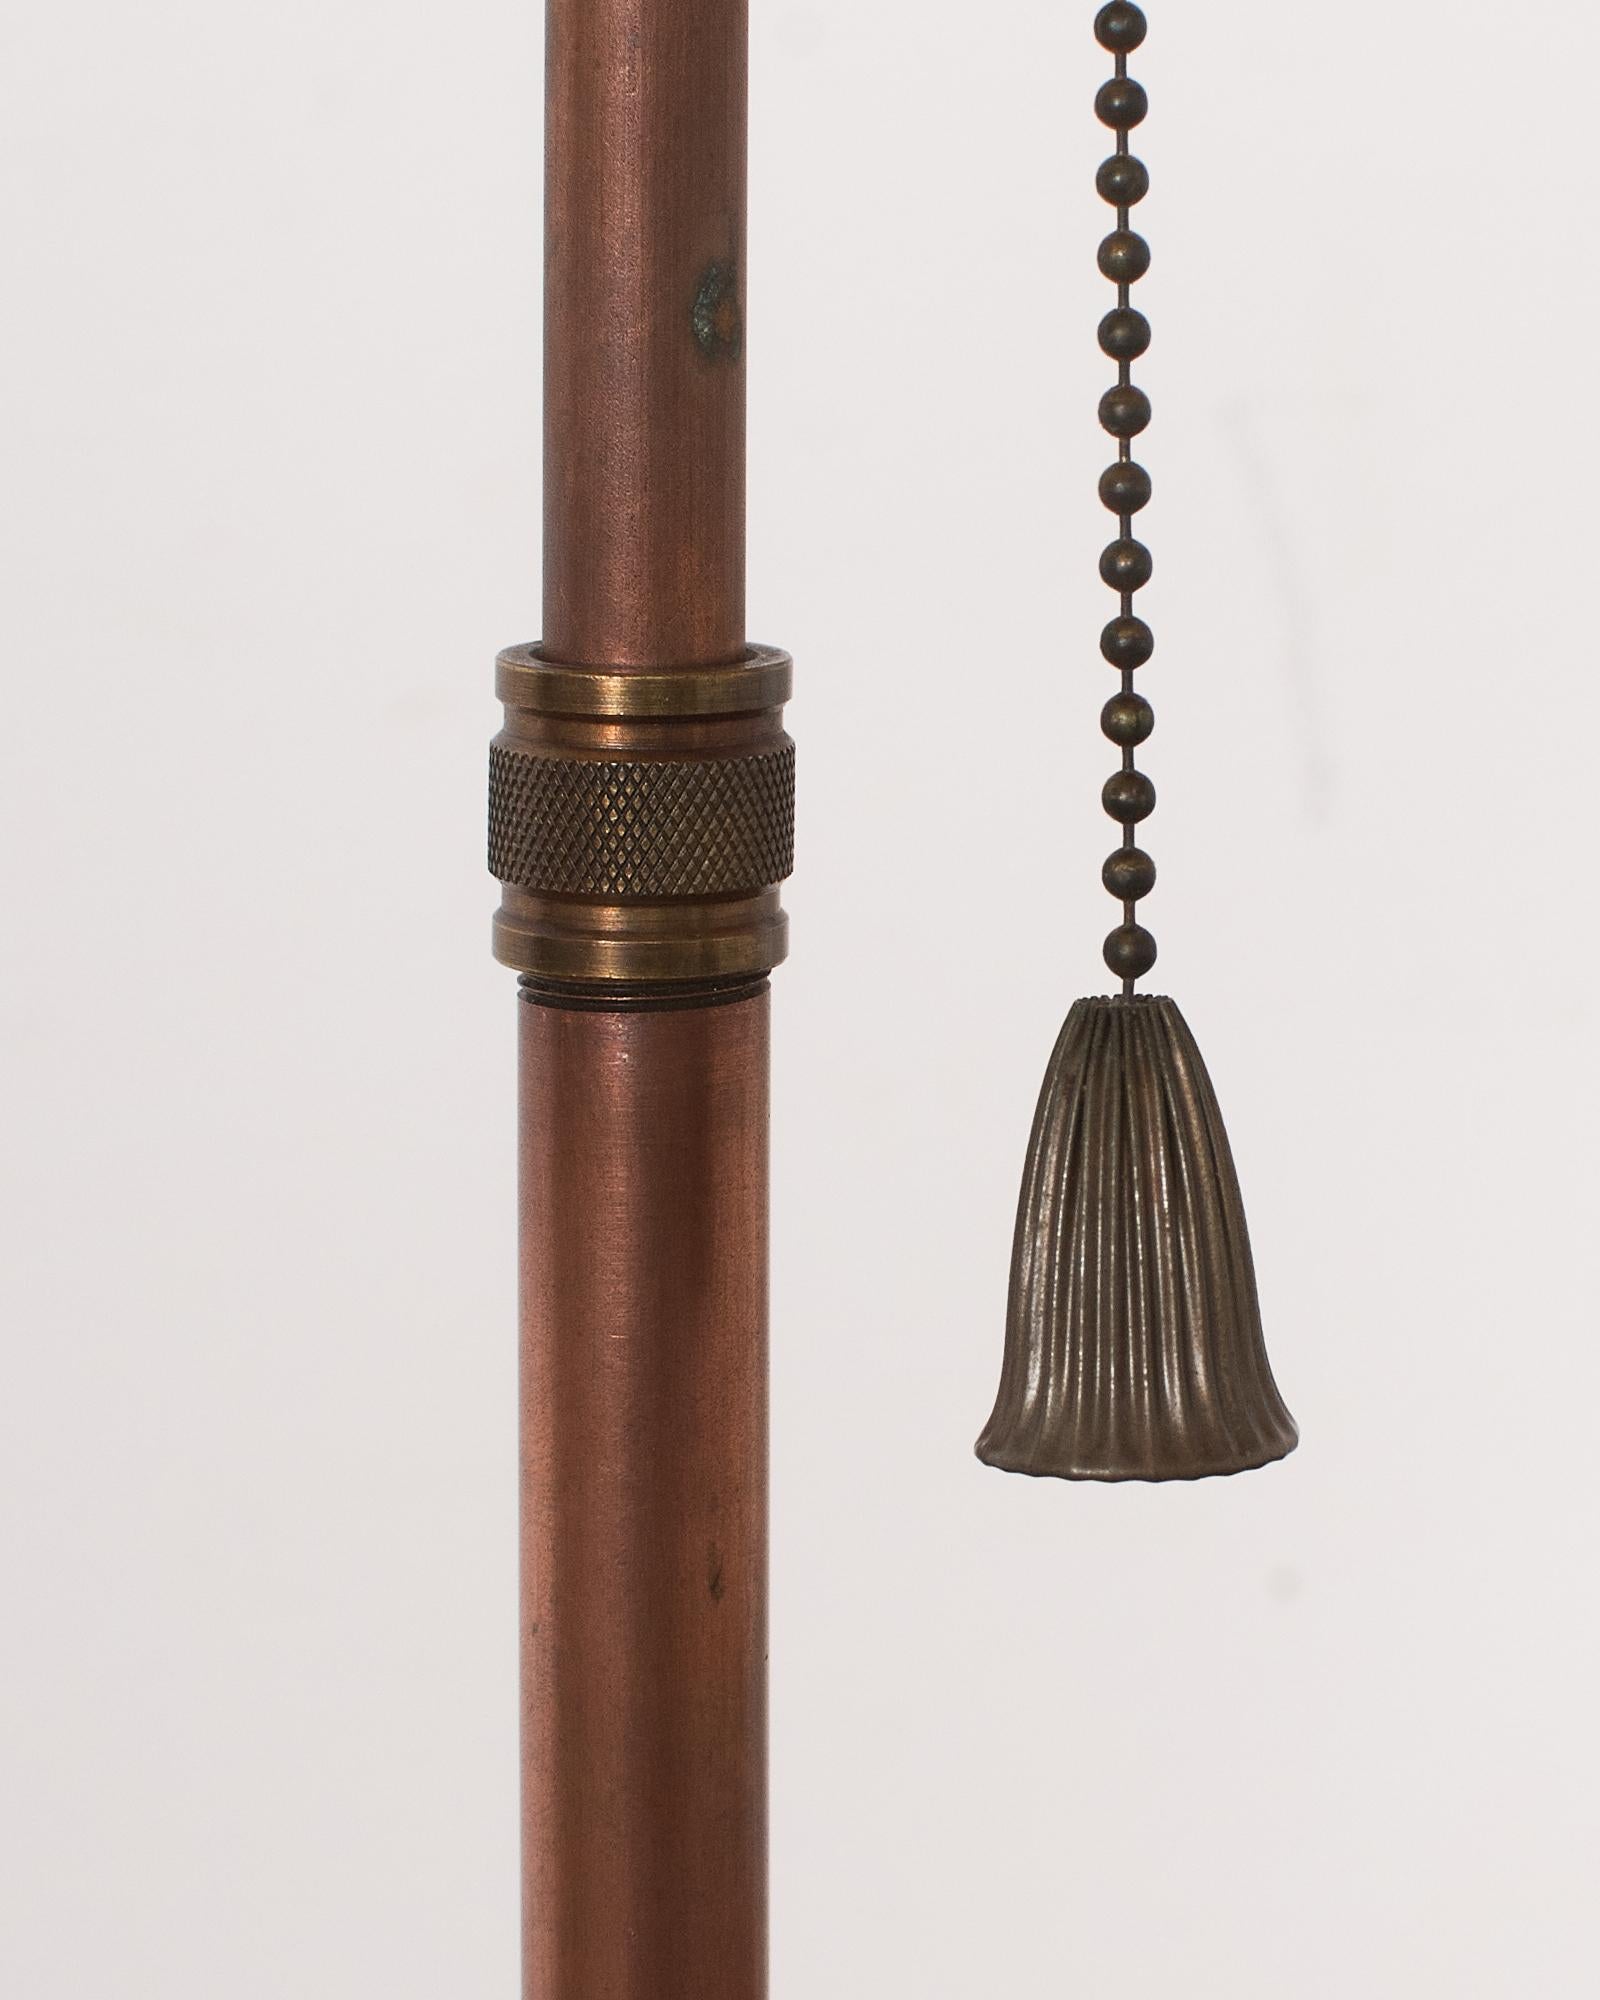 Pair of Patinated Bronzed Iron Height Adjustable Table Lamps In Good Condition For Sale In Rio Vista, CA